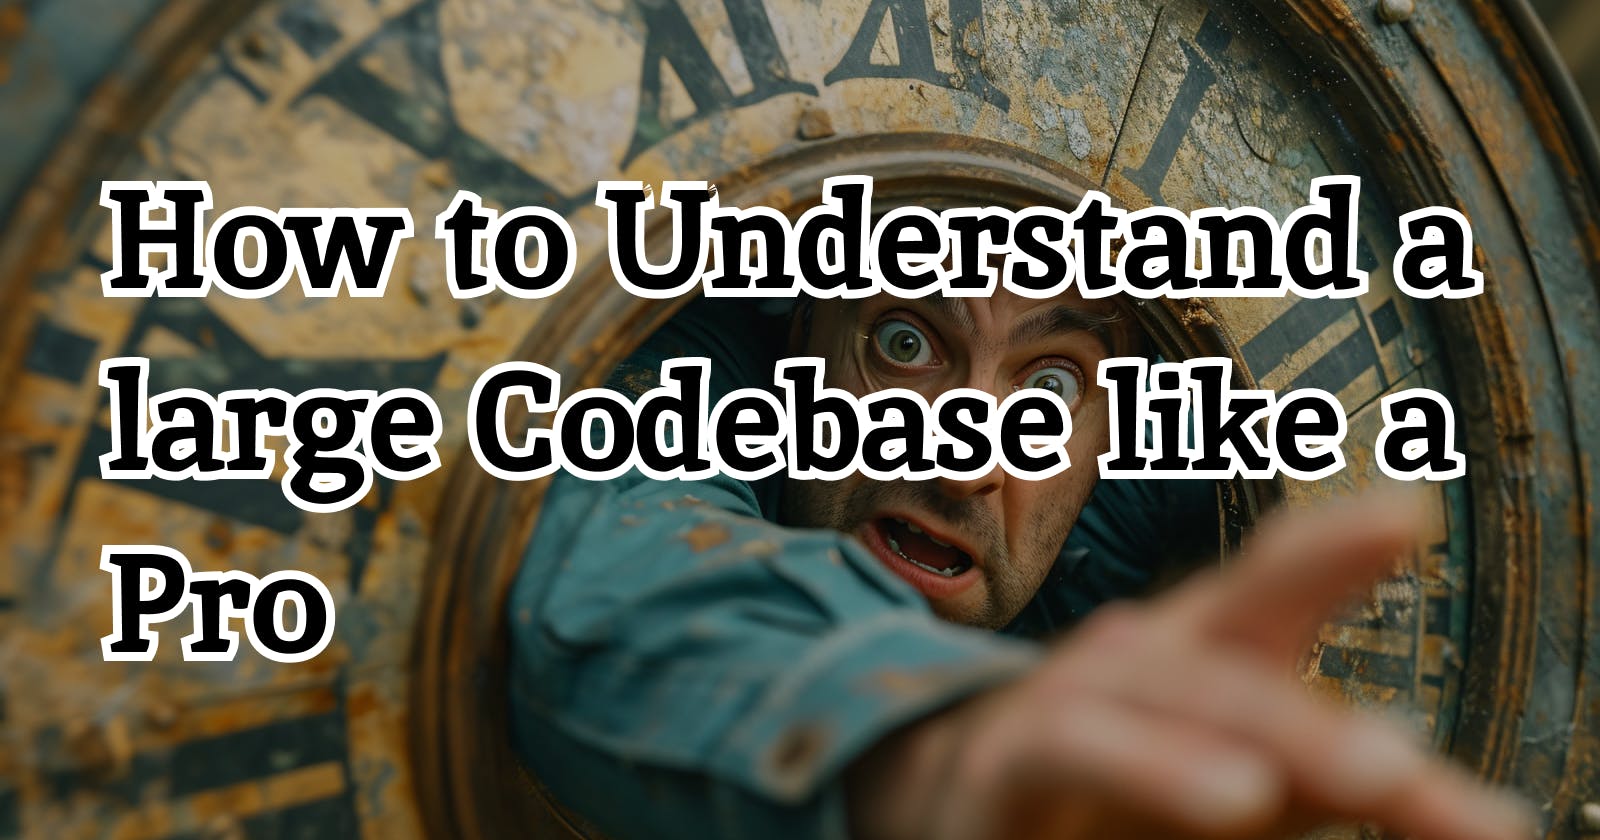 How to Understand Large Codebase like a Pro